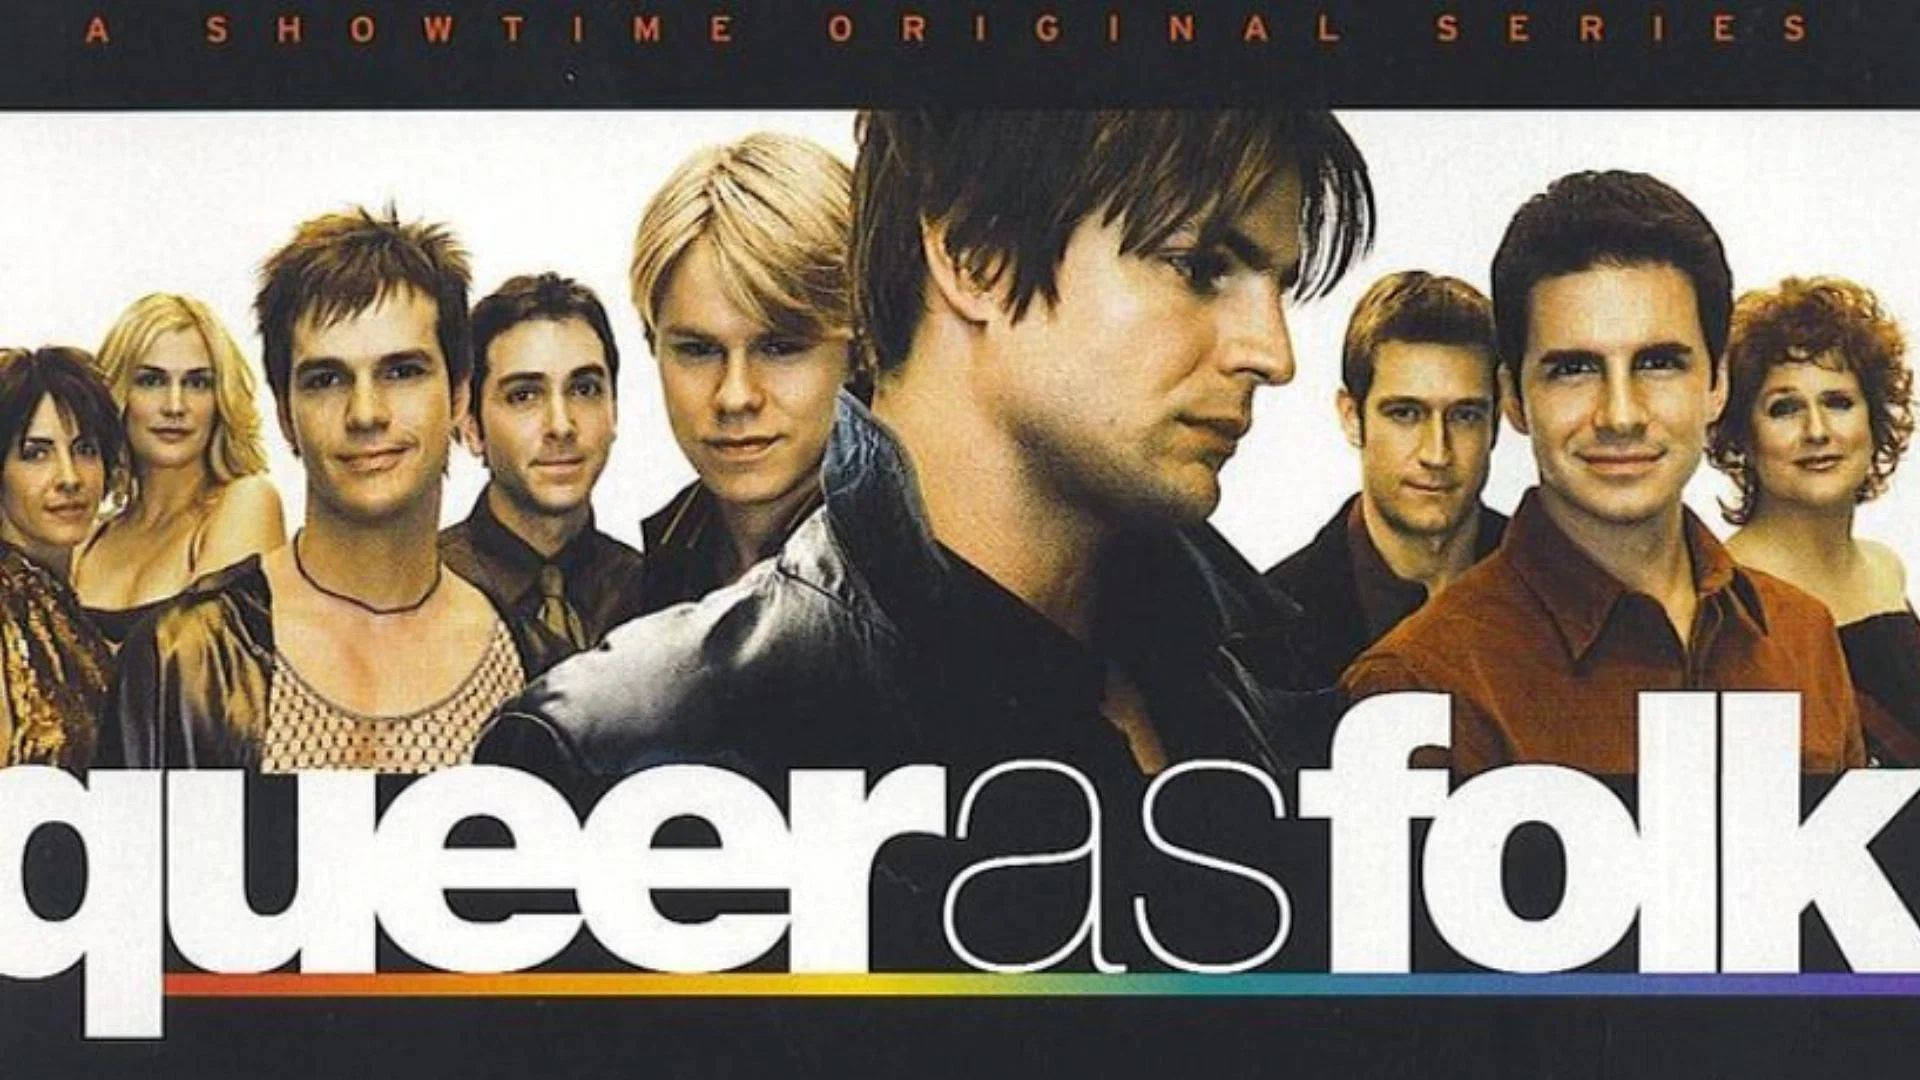 Queer As Folk Showtime Characters Wallpaper